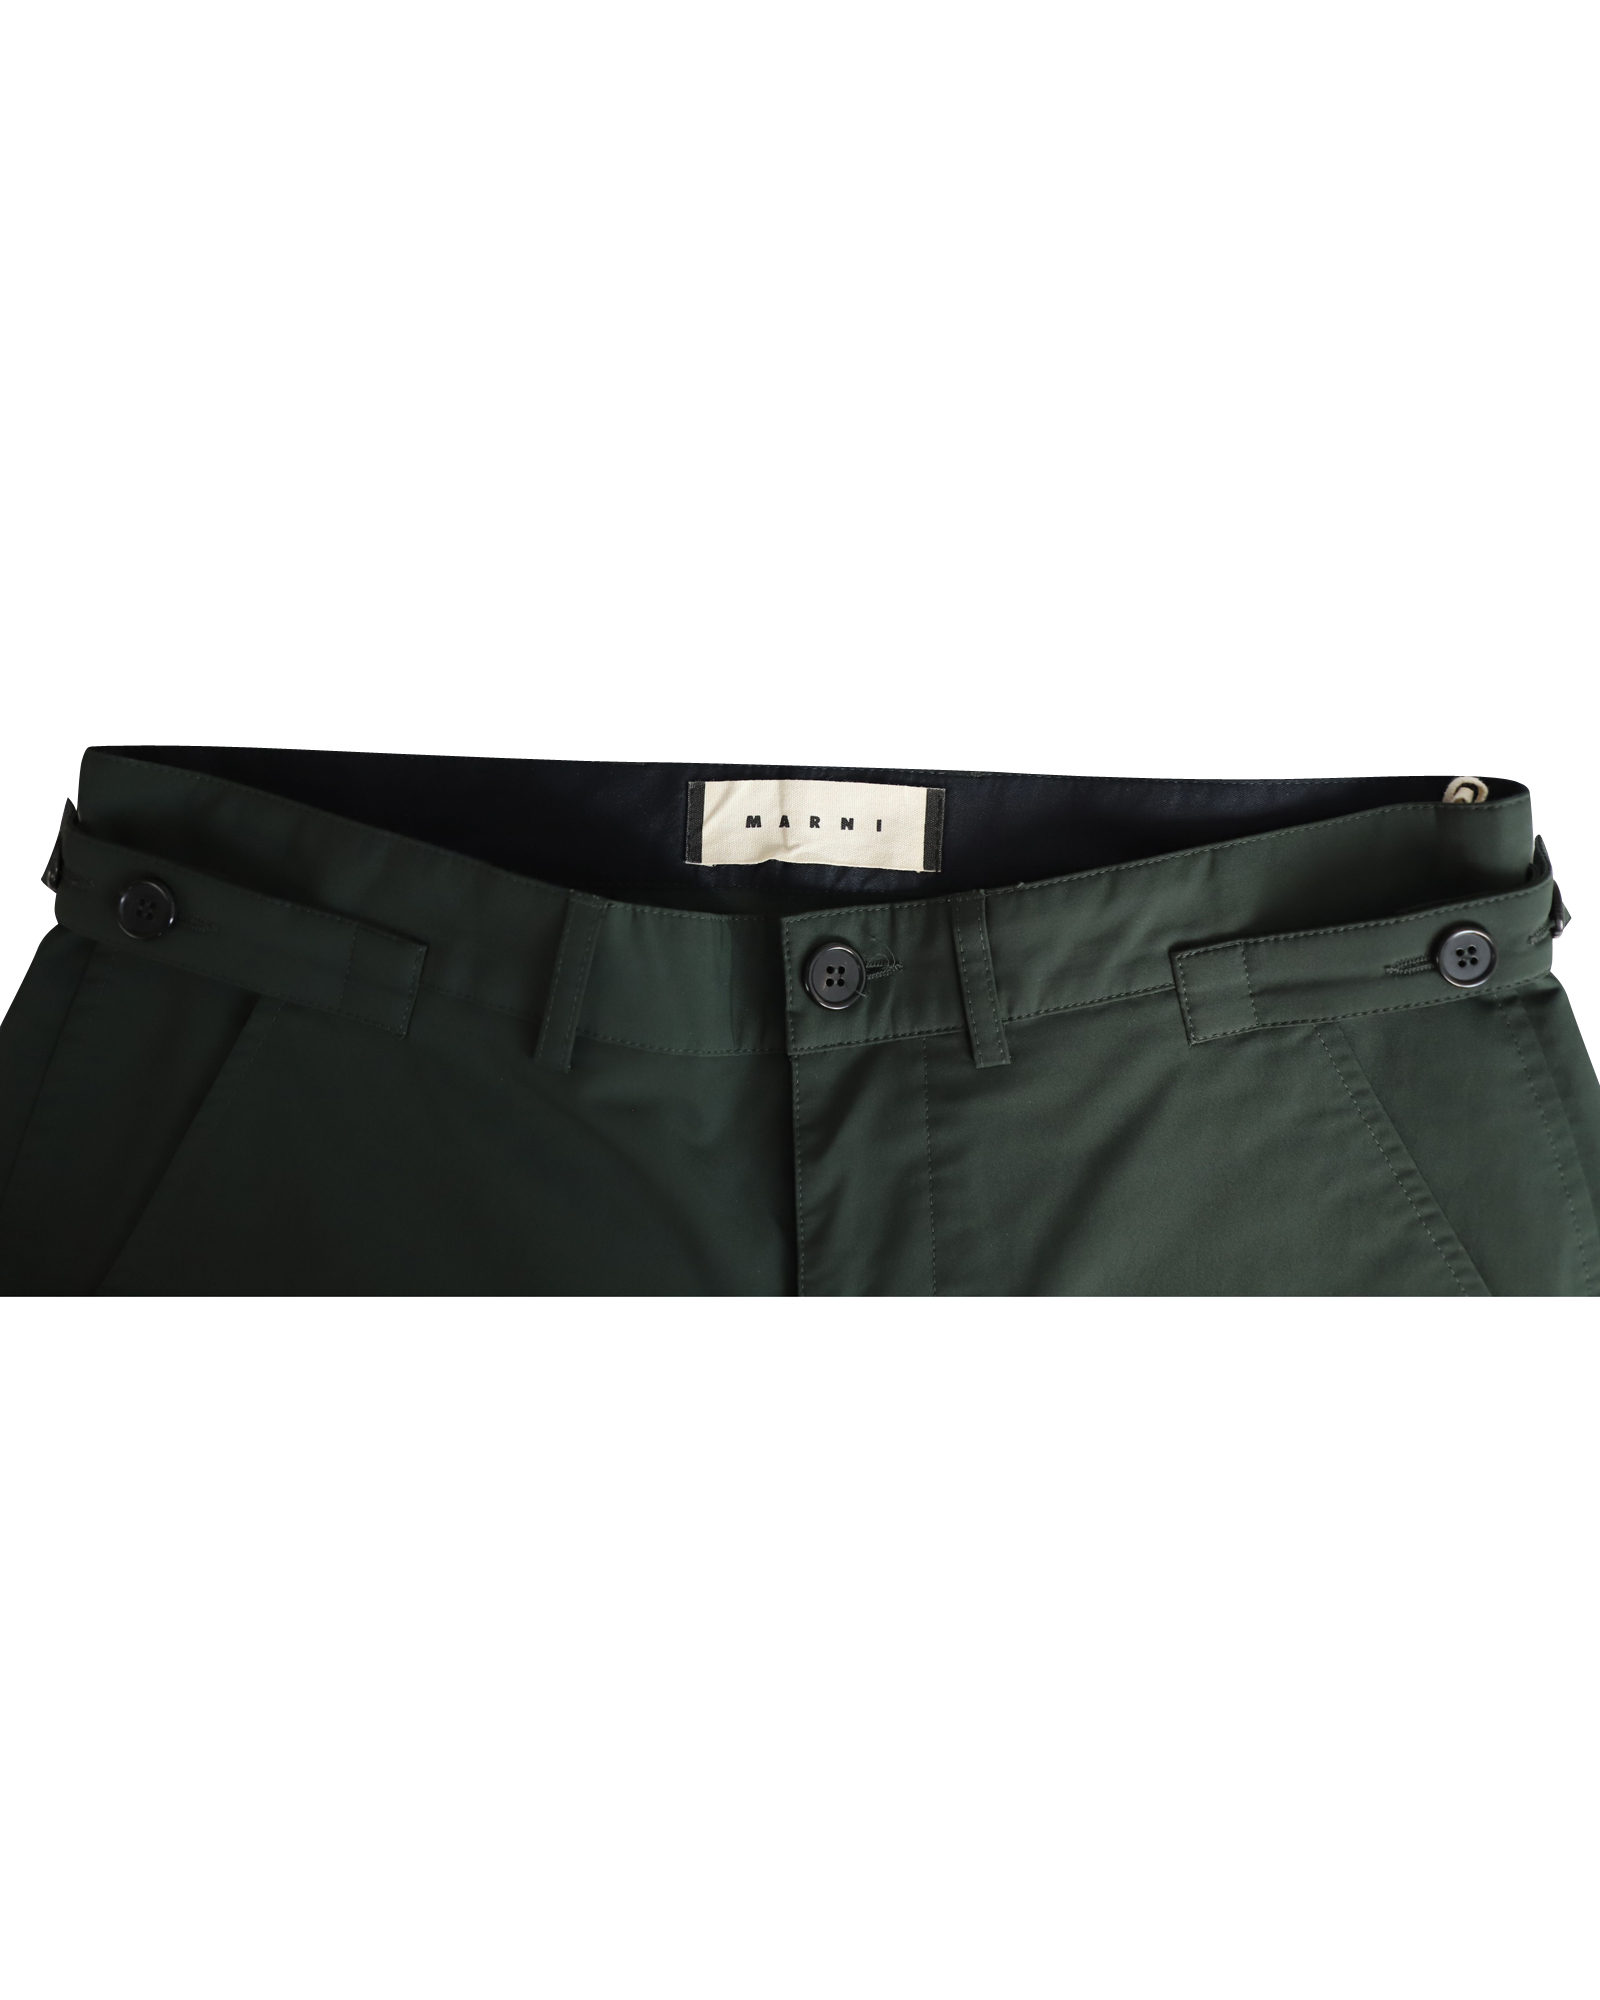 Relaxed Dark Green Trousers with Elegant Style